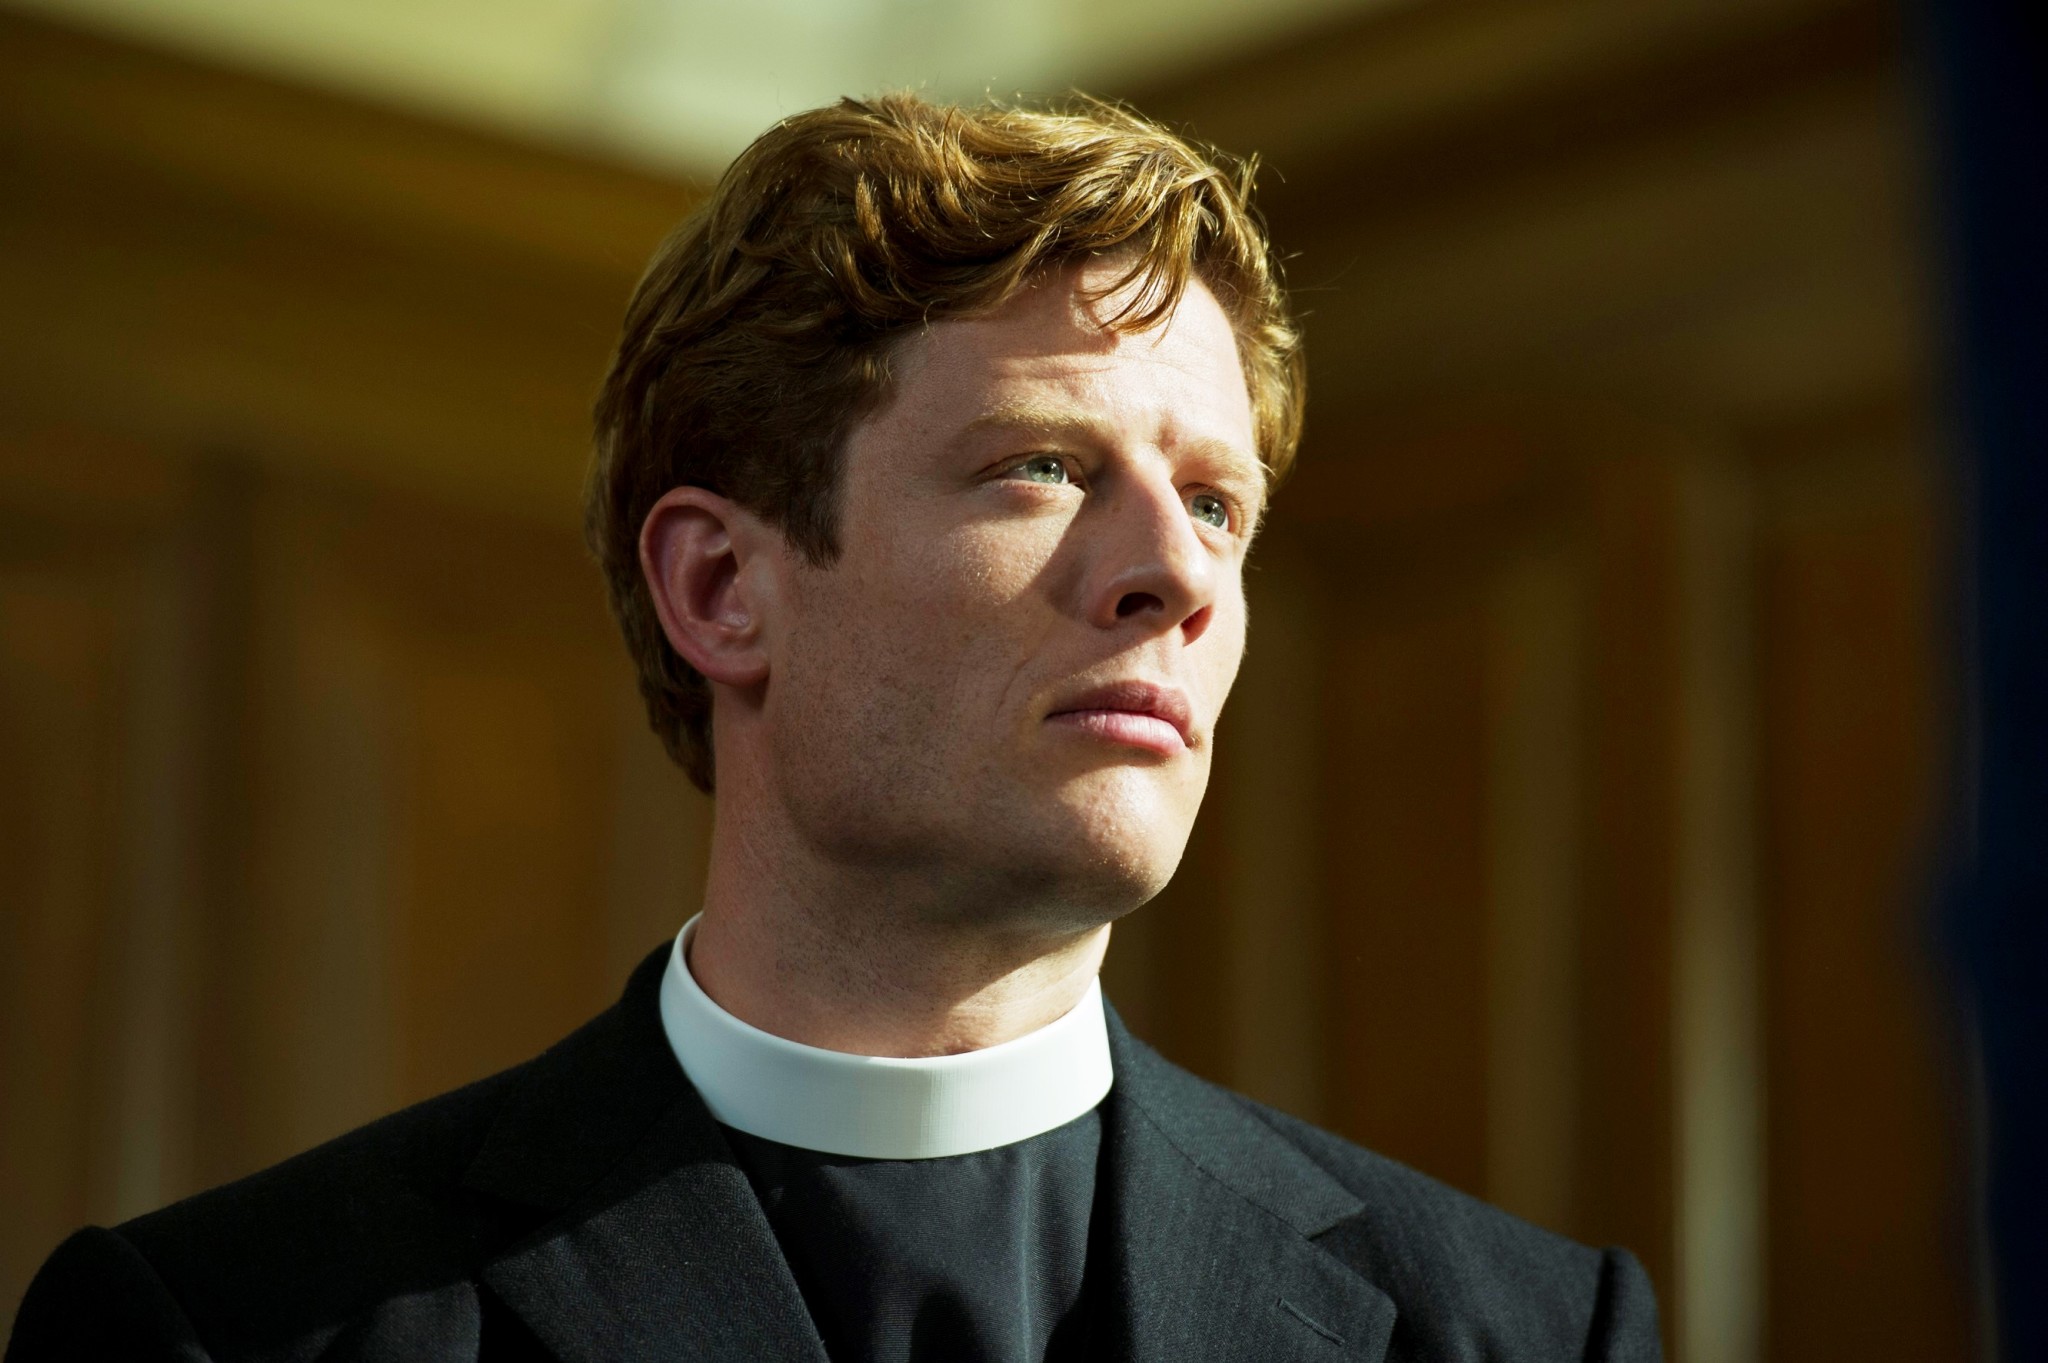 KUDOS FOR ITV GRANTCHESTER SERIES 2 EPISODE 3 Pictured: JAMES NORTON as Sidney Chambers. This image is the copyright of ITV and must only be used in relation to GRANTCHESTER